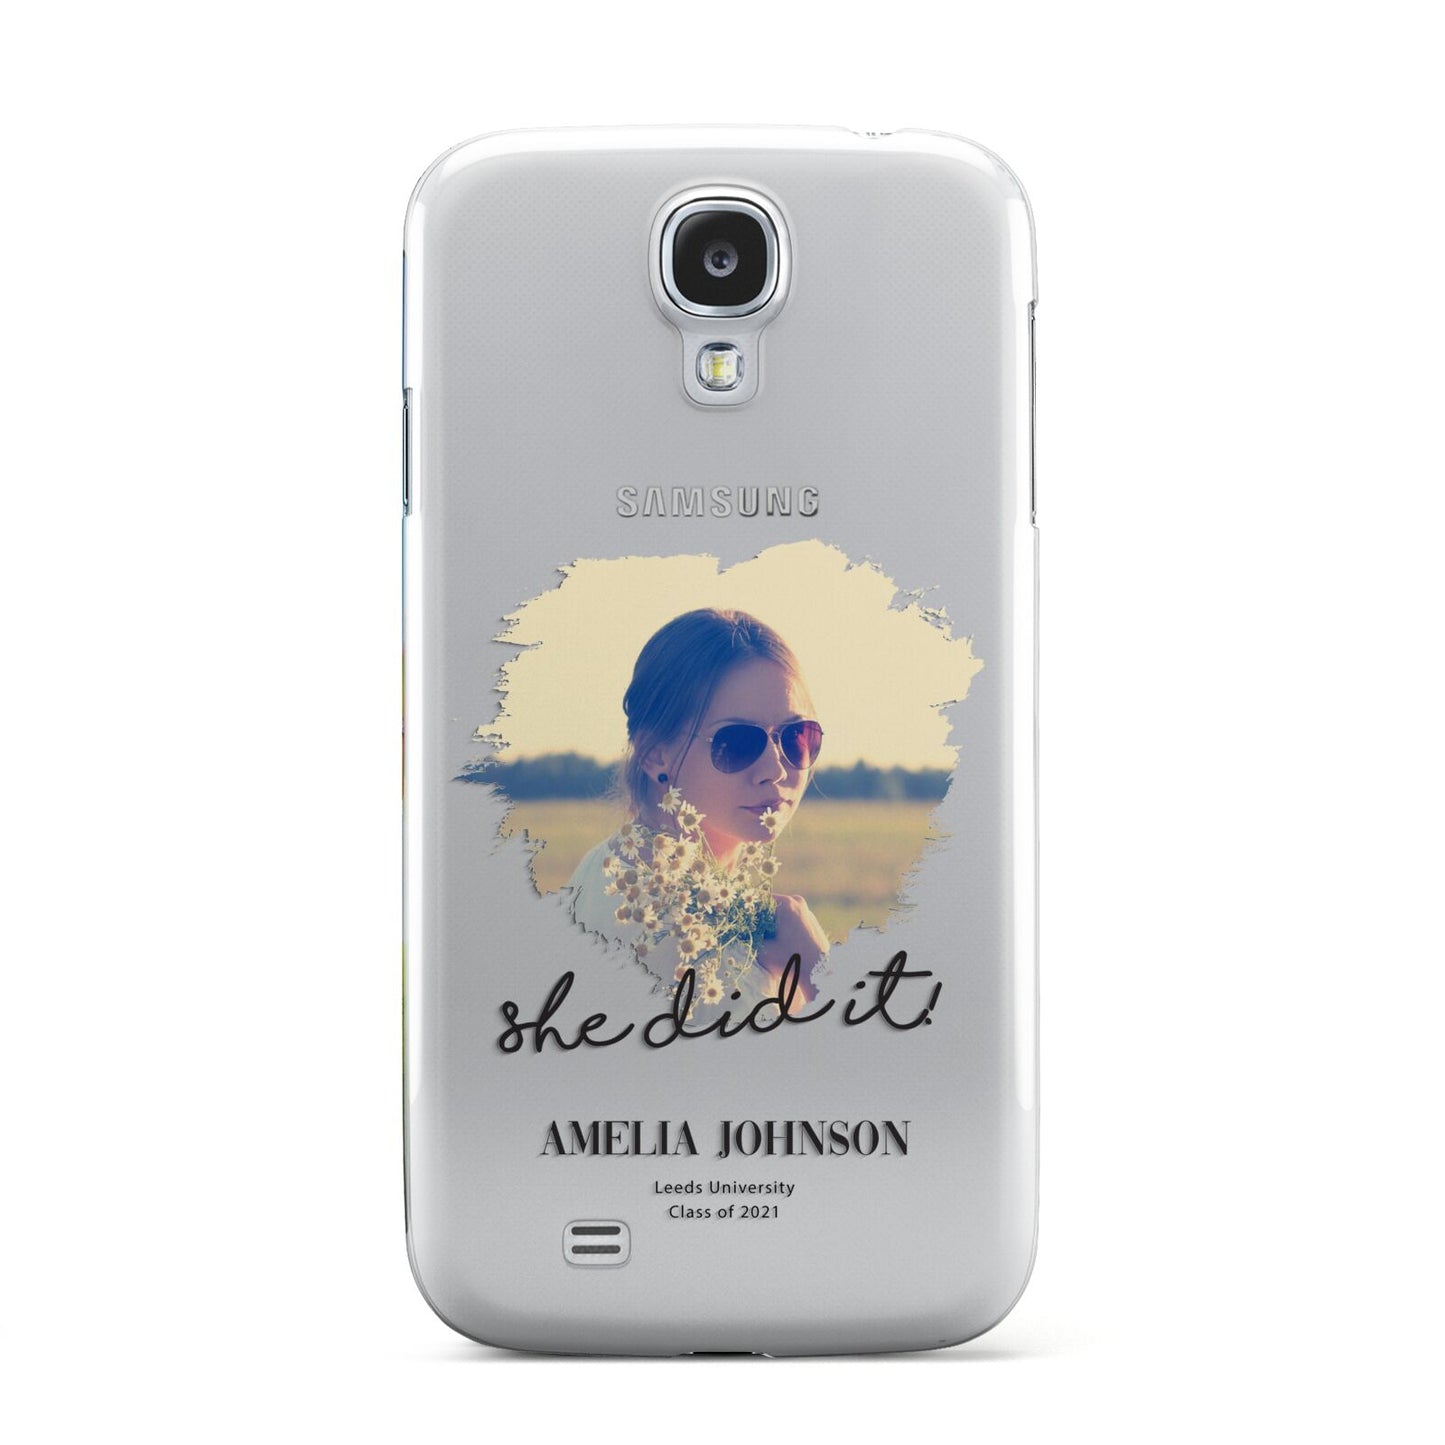 She Did It Graduation Photo with Name Samsung Galaxy S4 Case